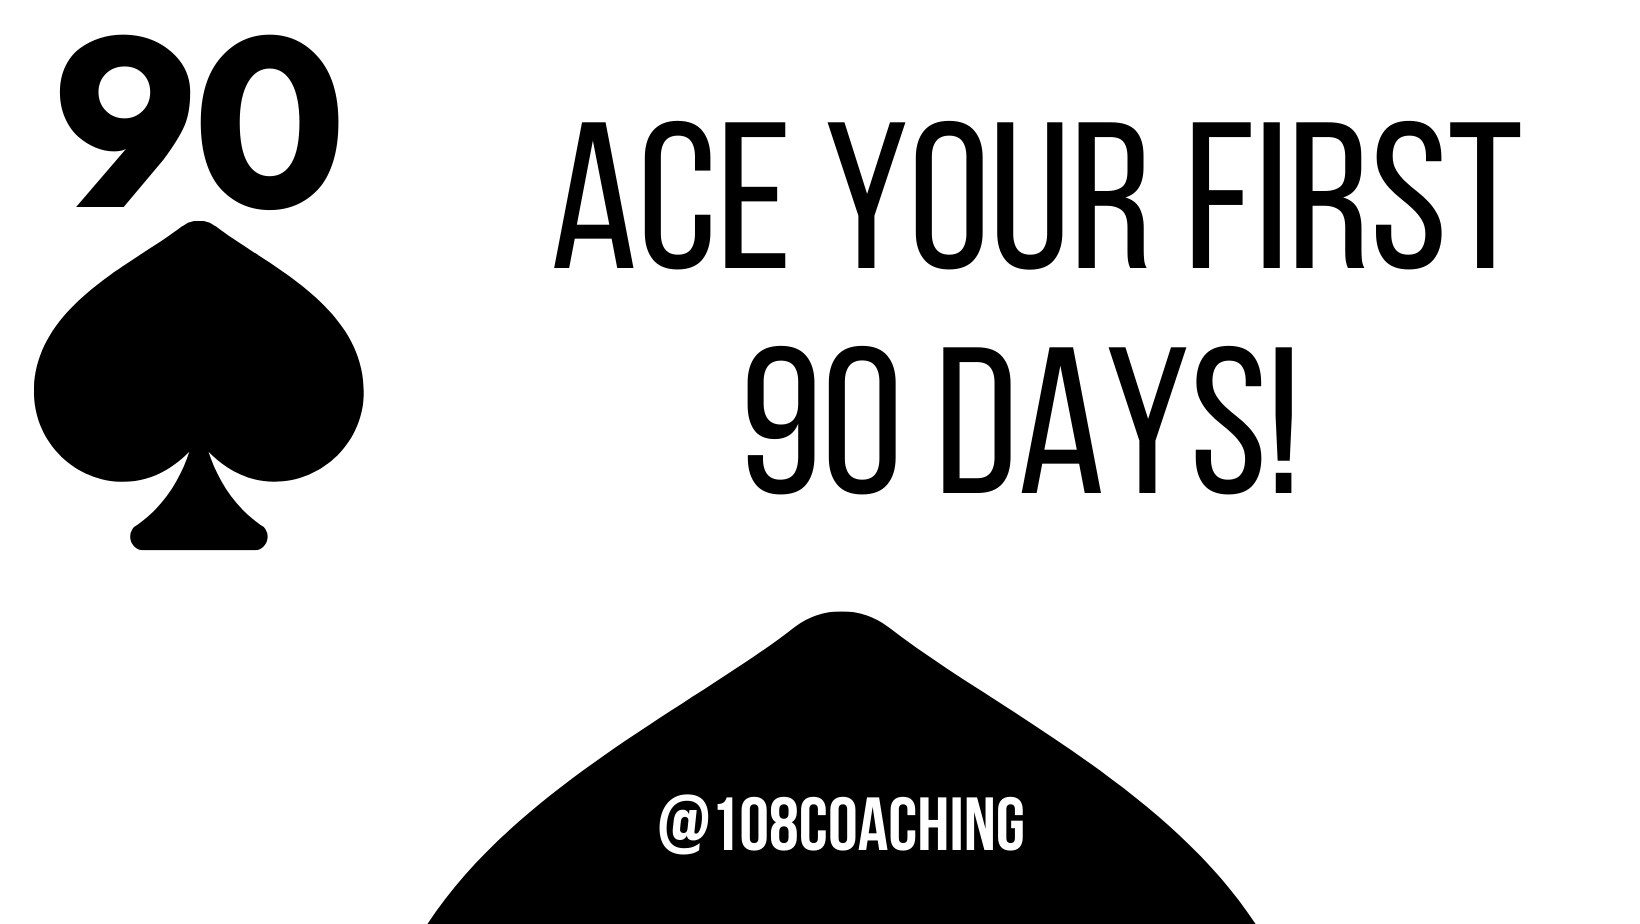 ♠️ Ace Your First 90 Days! ♠️